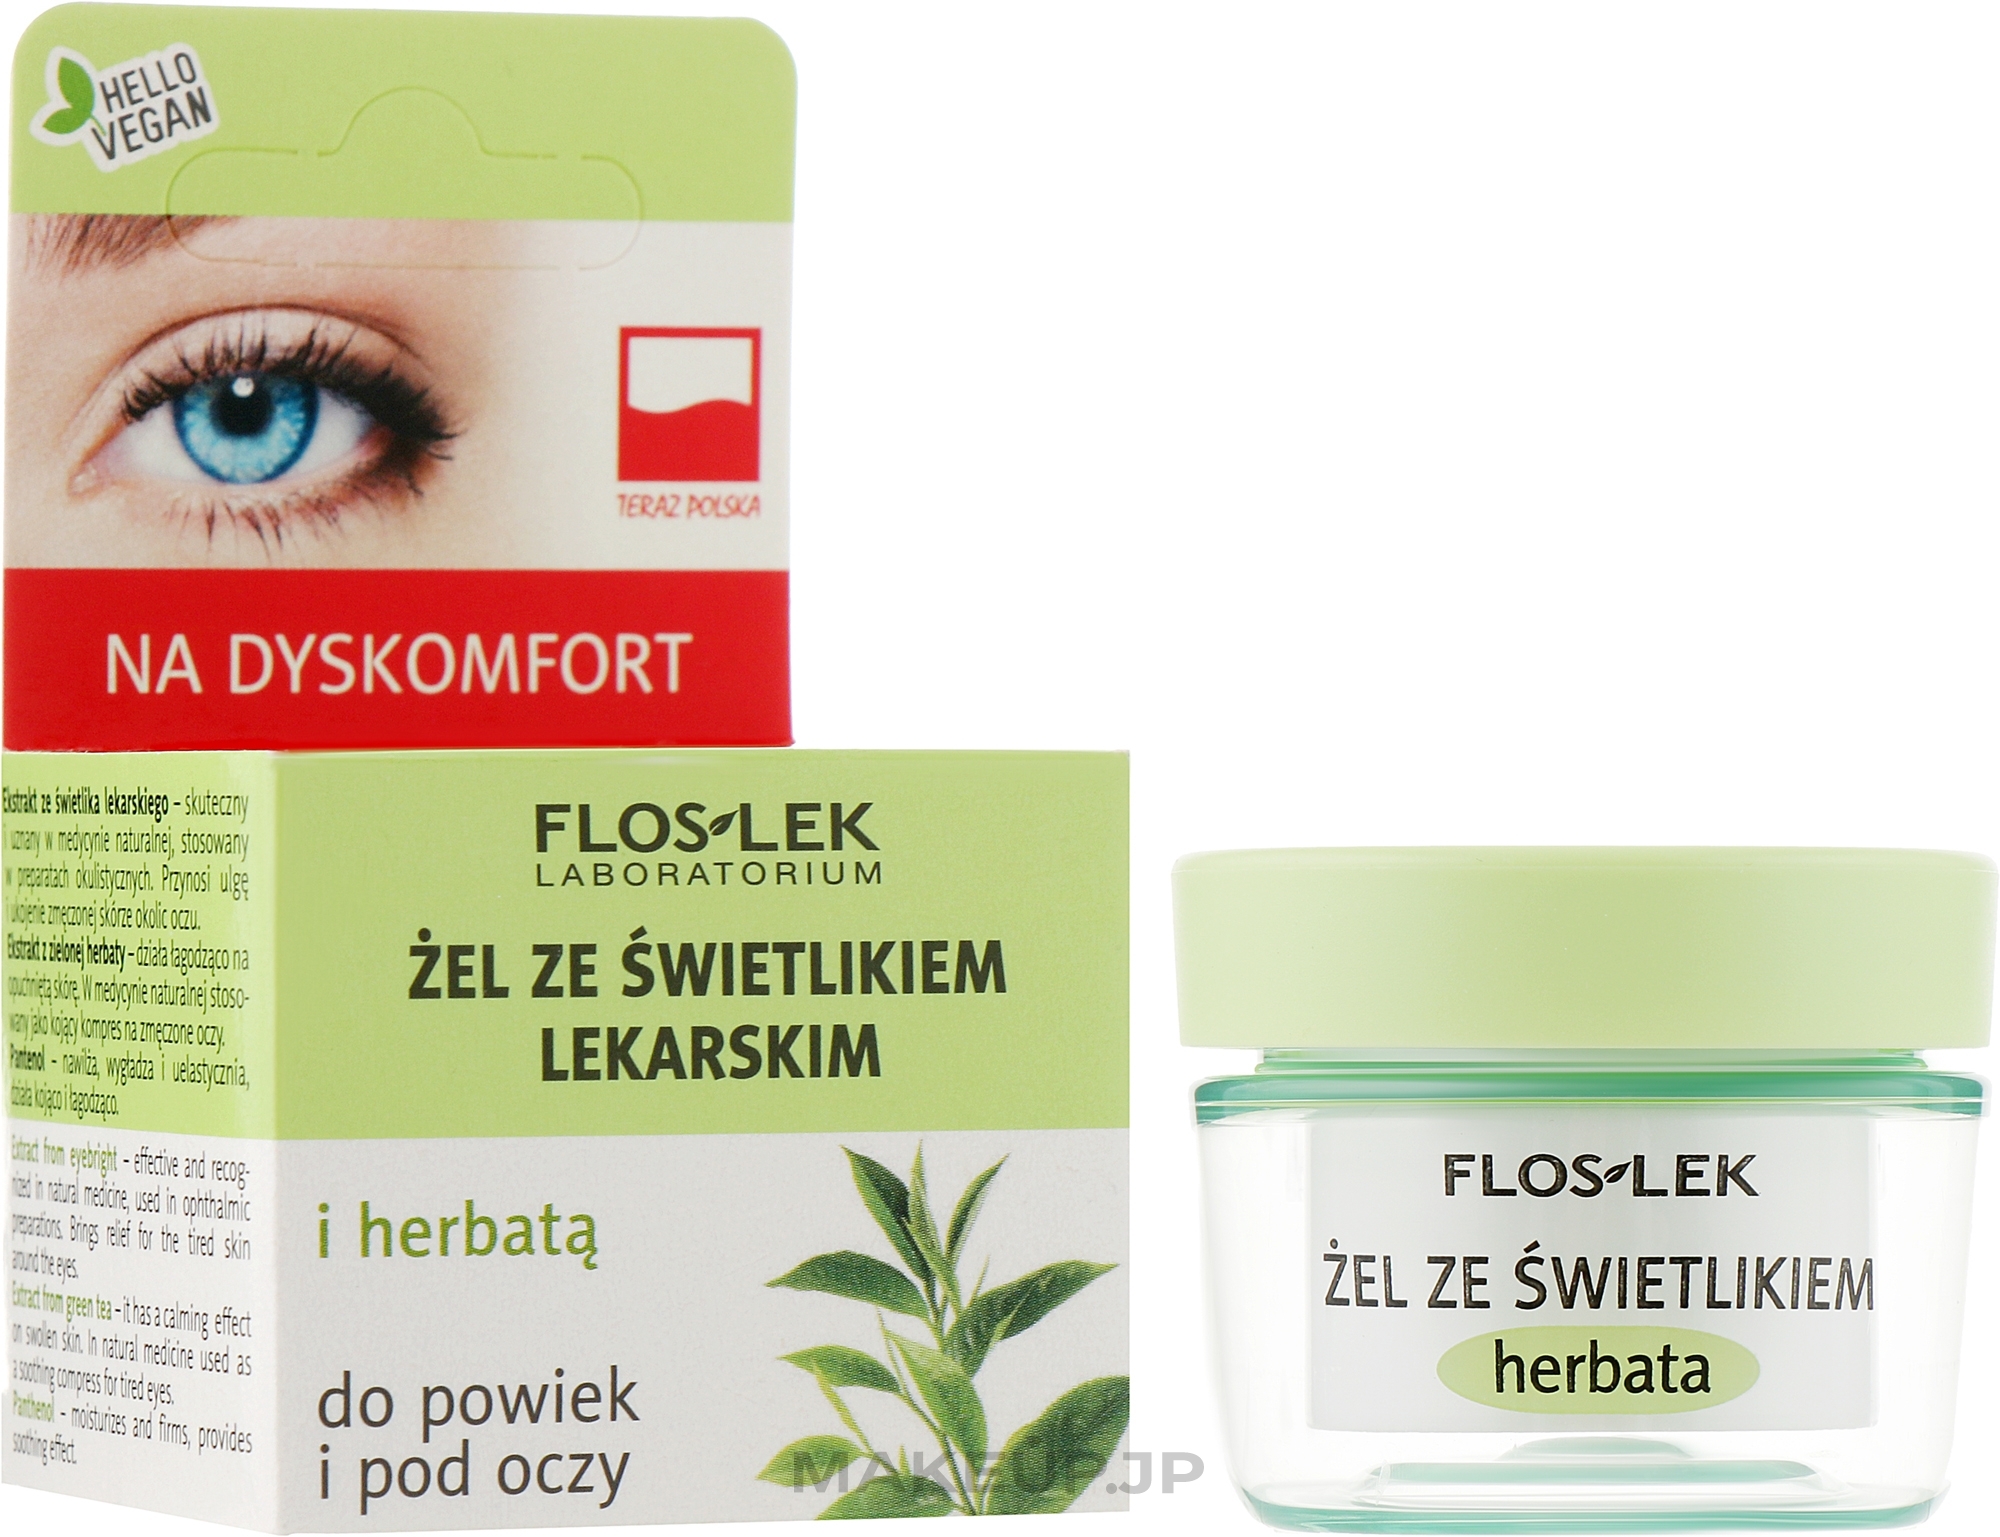 Lid and Under Anti-Aging Eye Gel with Eyebright and Green Tea - Floslek Lid And Under Eye Gel With Eyebright And Green Tea  — photo 10 g